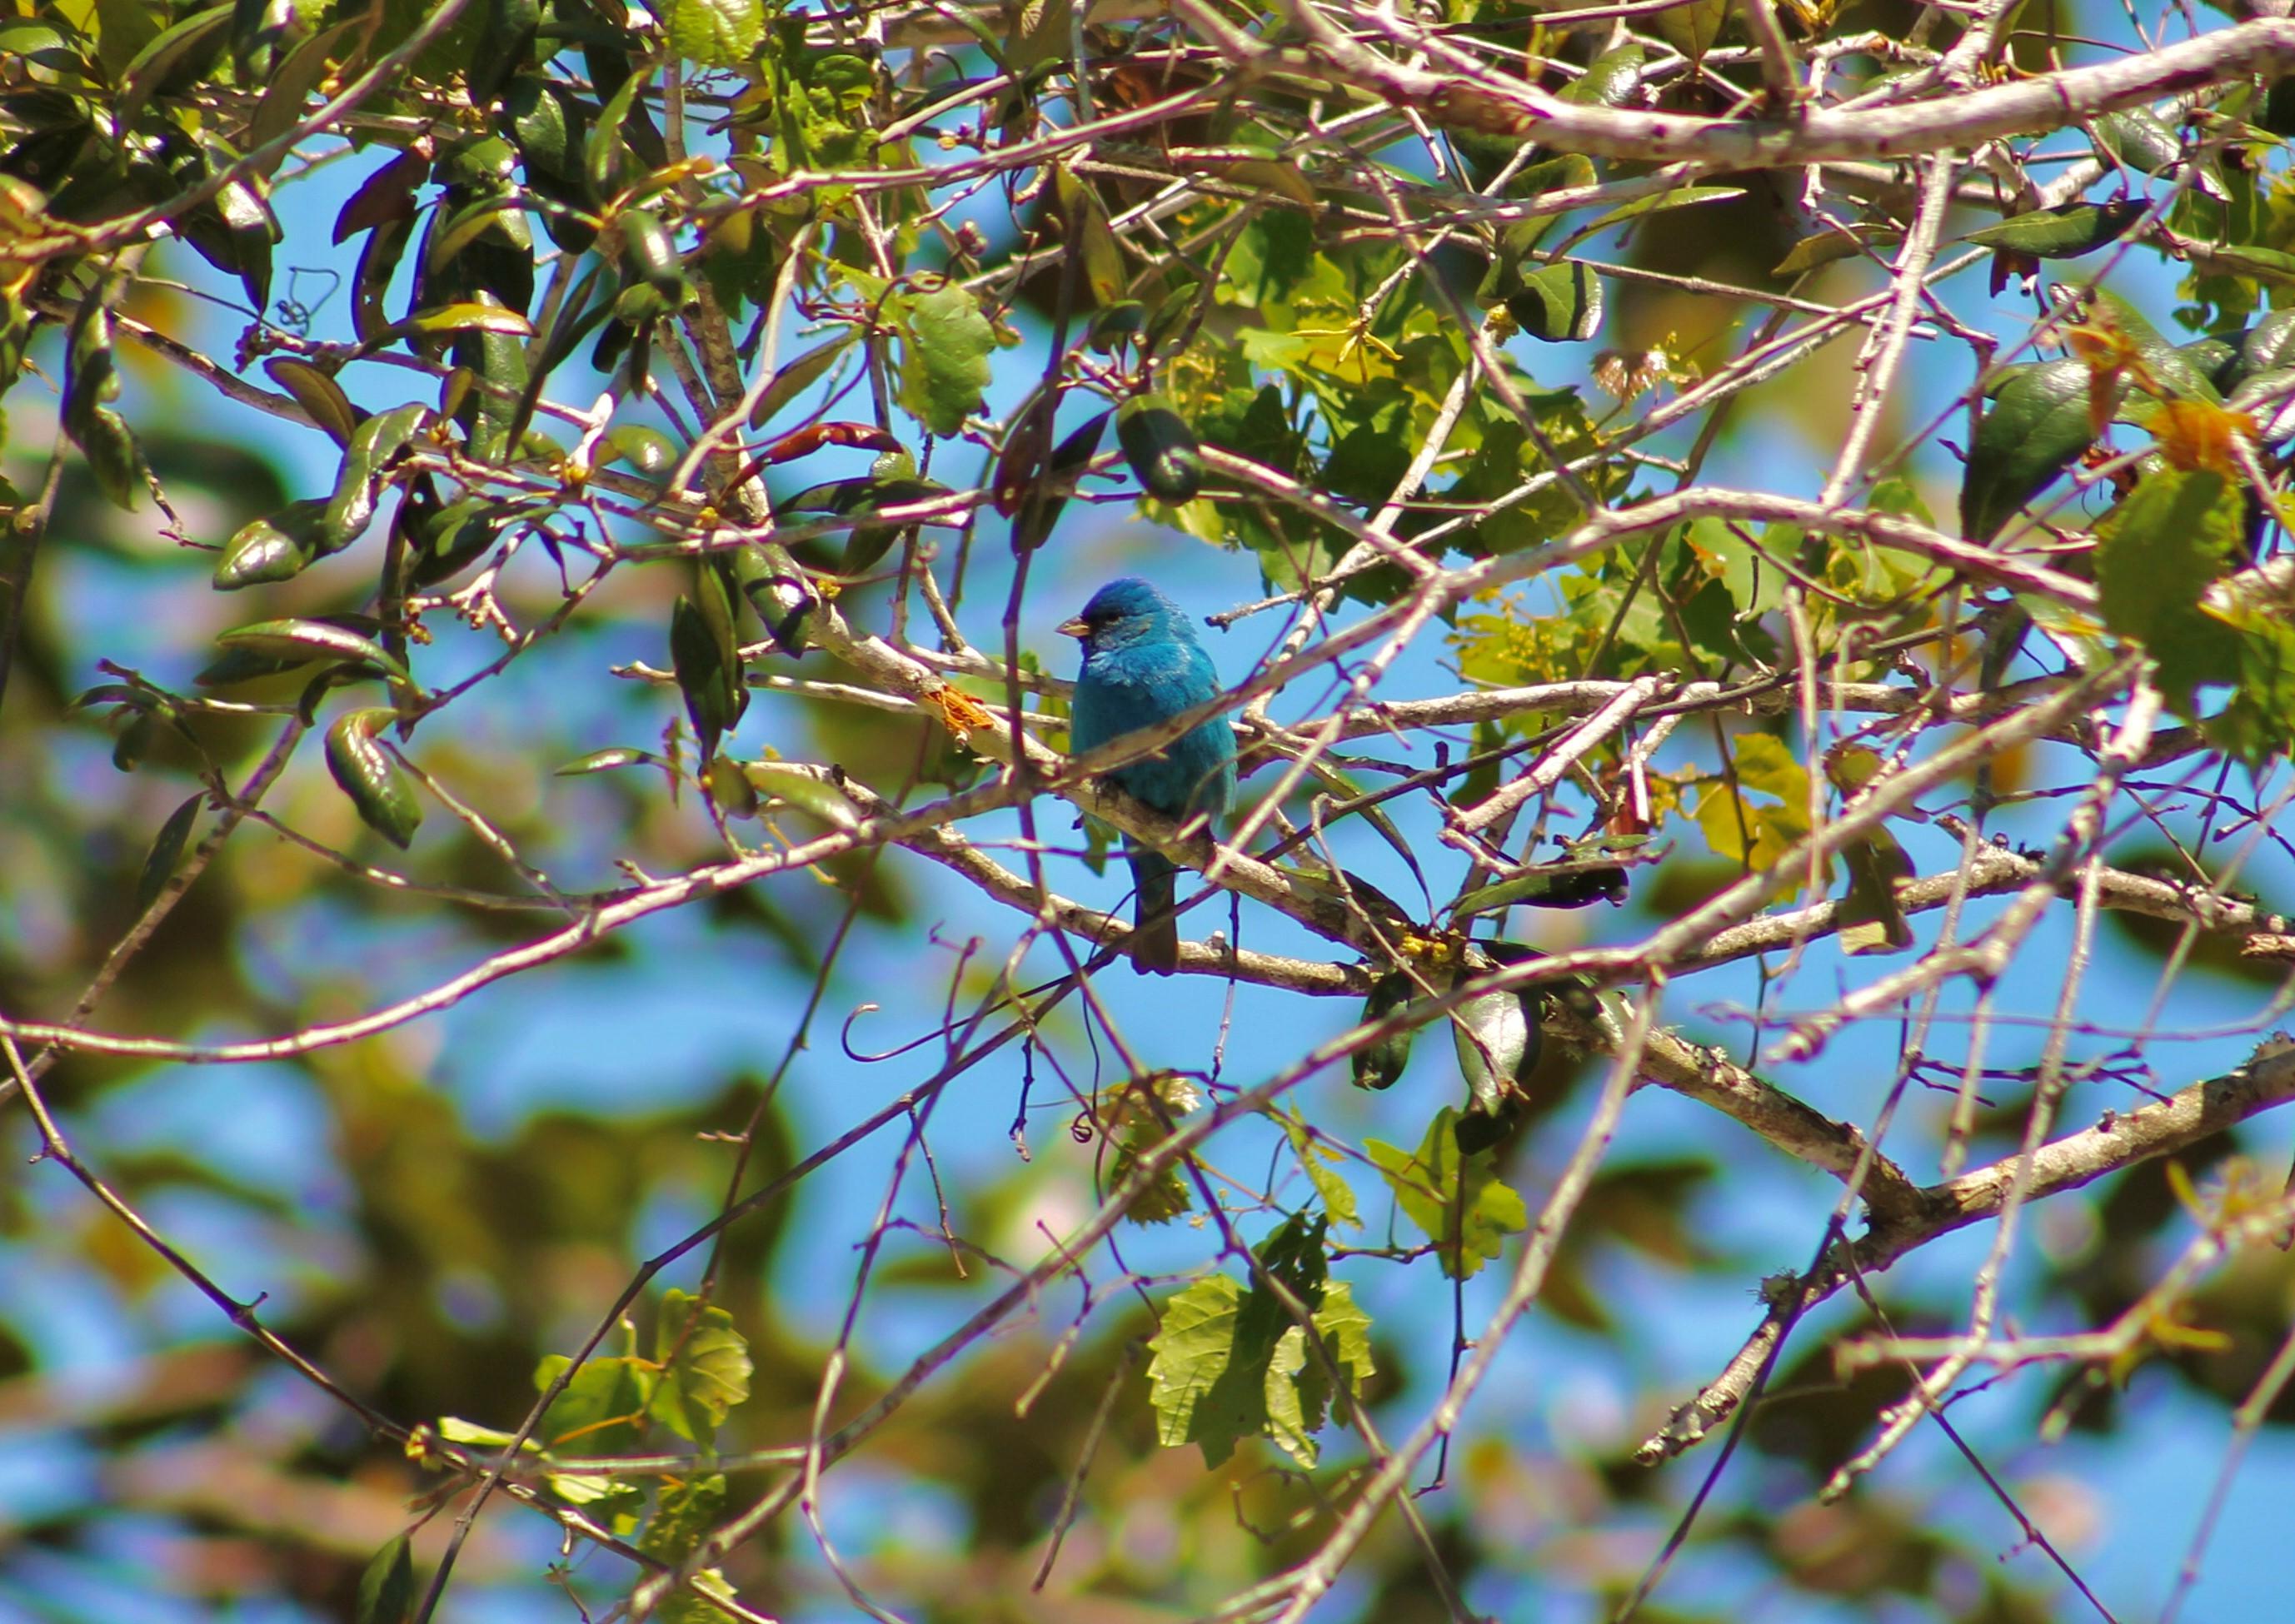 Indigo Bunting Perched on a Branch at Gulf State Park